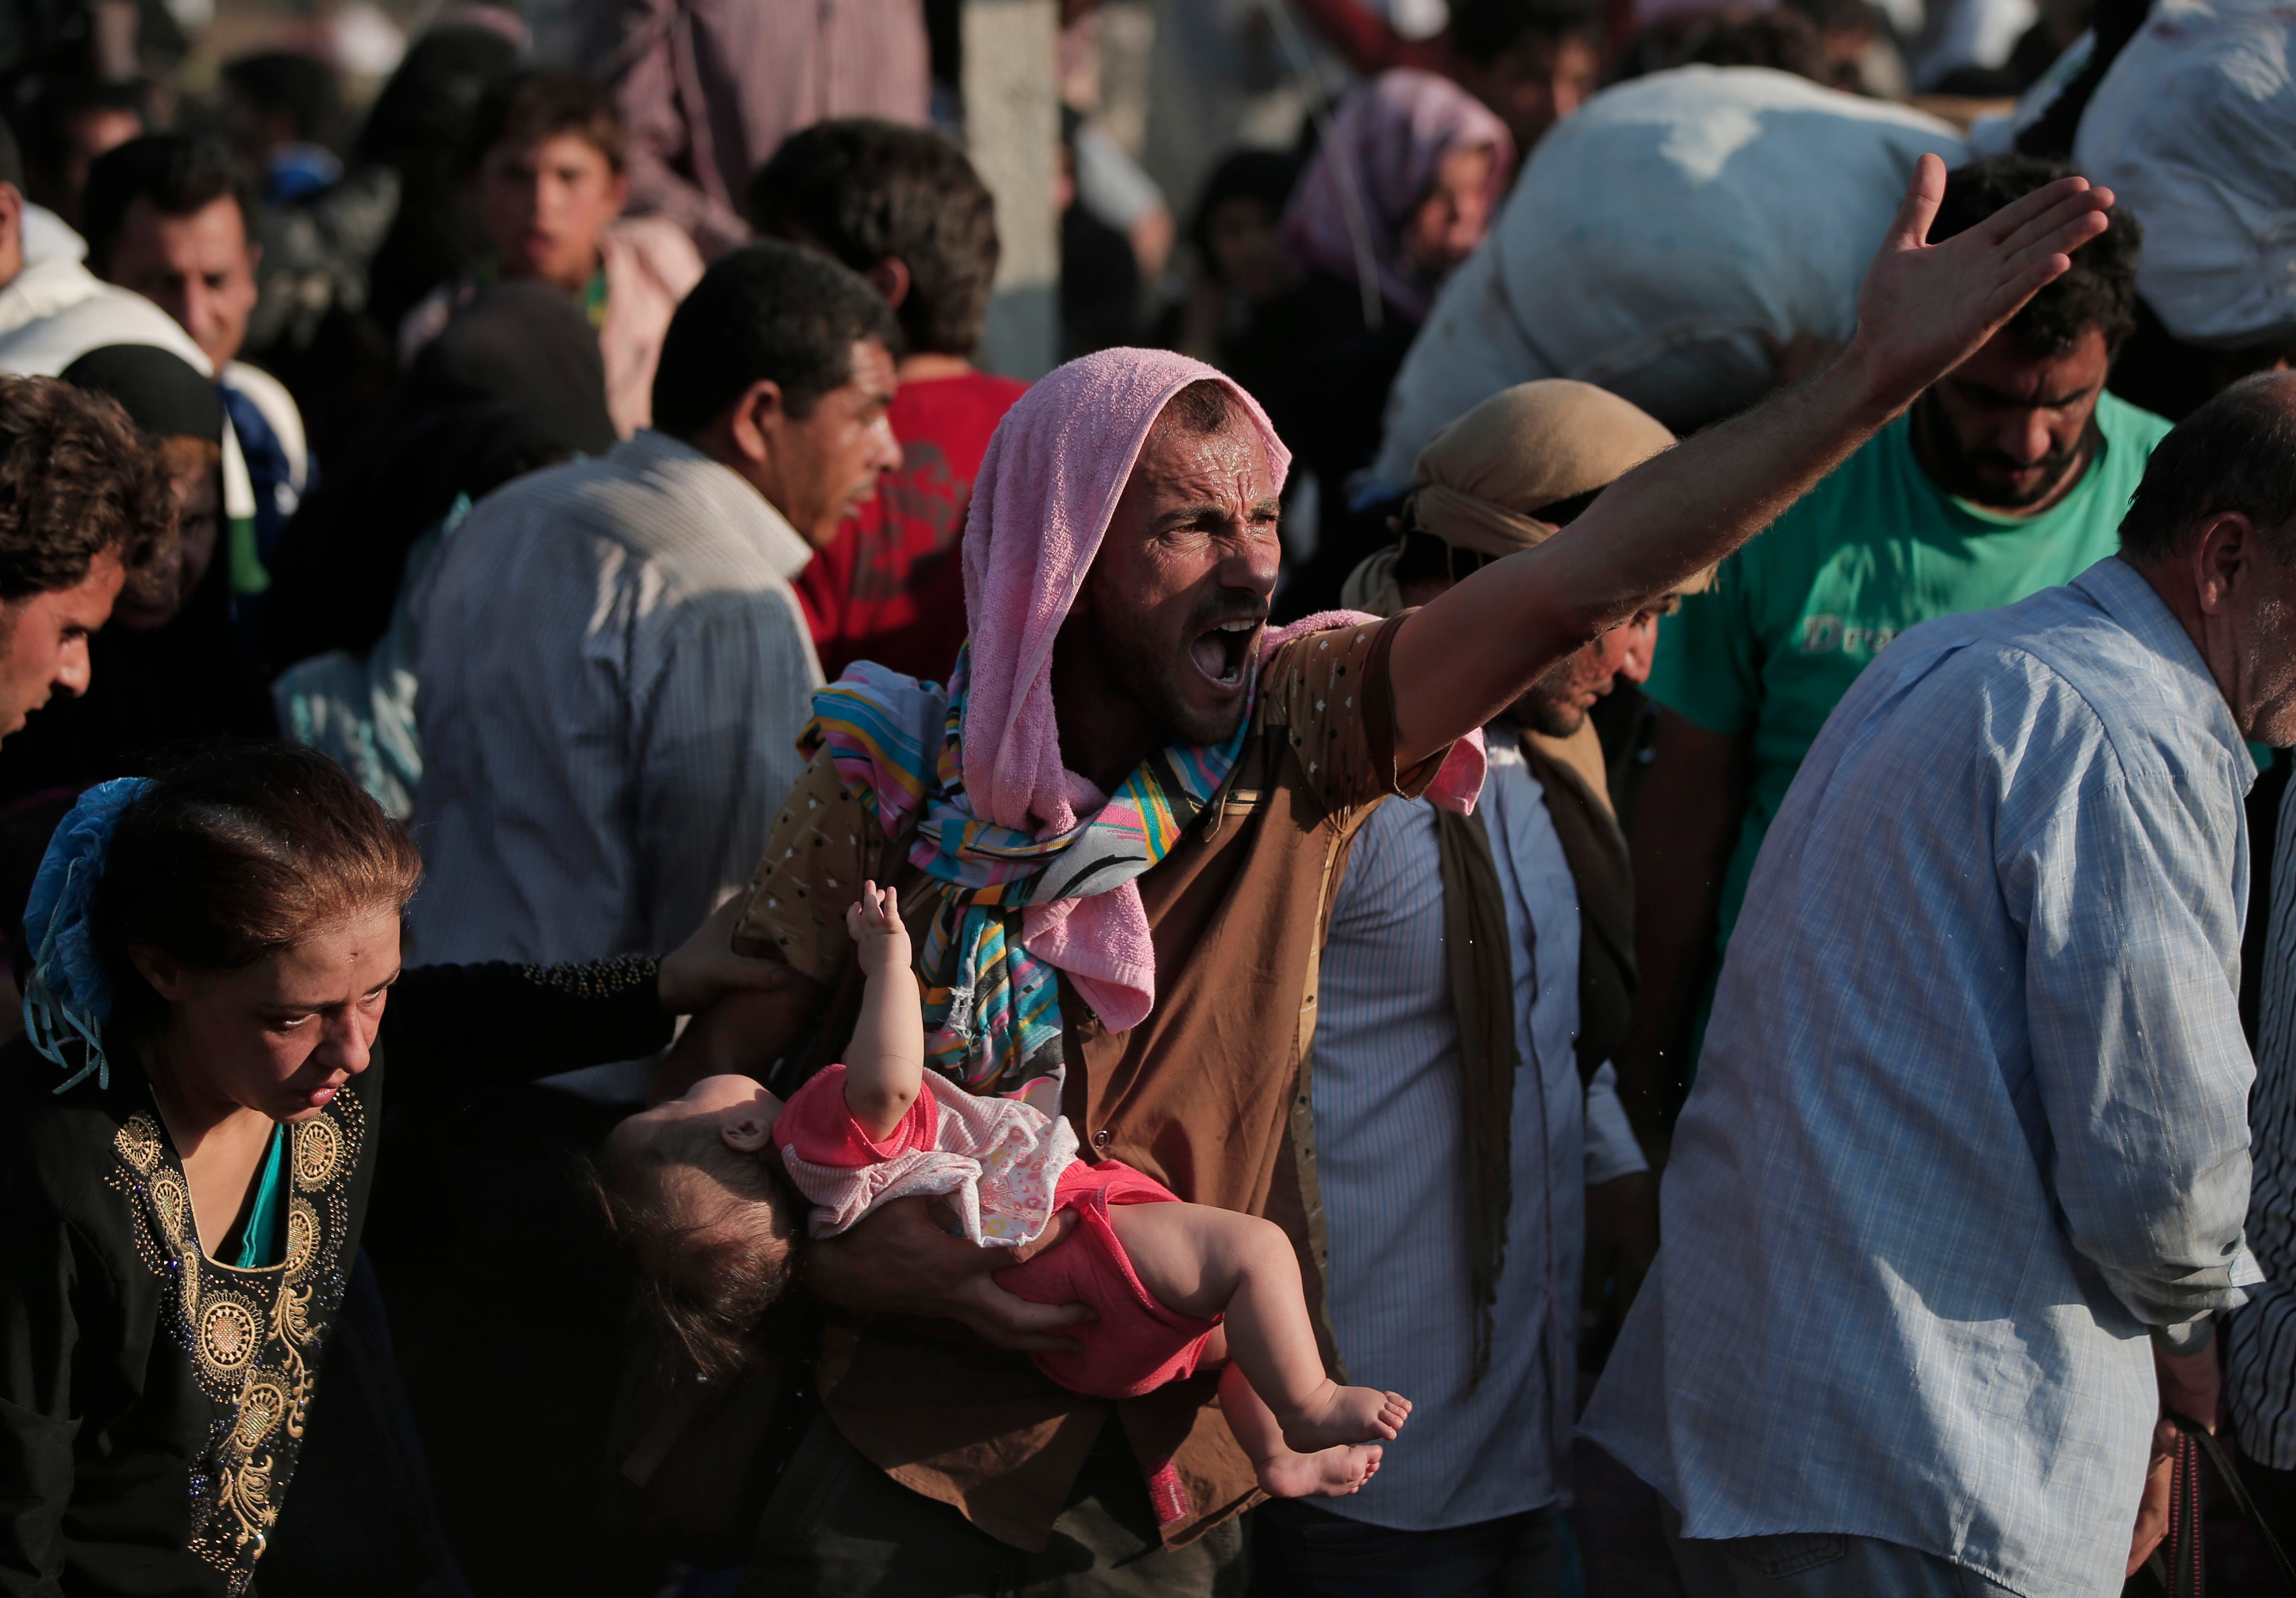 A Syrian refugee screams for help as he carries a baby after crossing over the broken border fence into Turkey from Syria in Akcakale, Sanliurfa province, southeastern Turkey, Sunday, June 14, 2015. AP